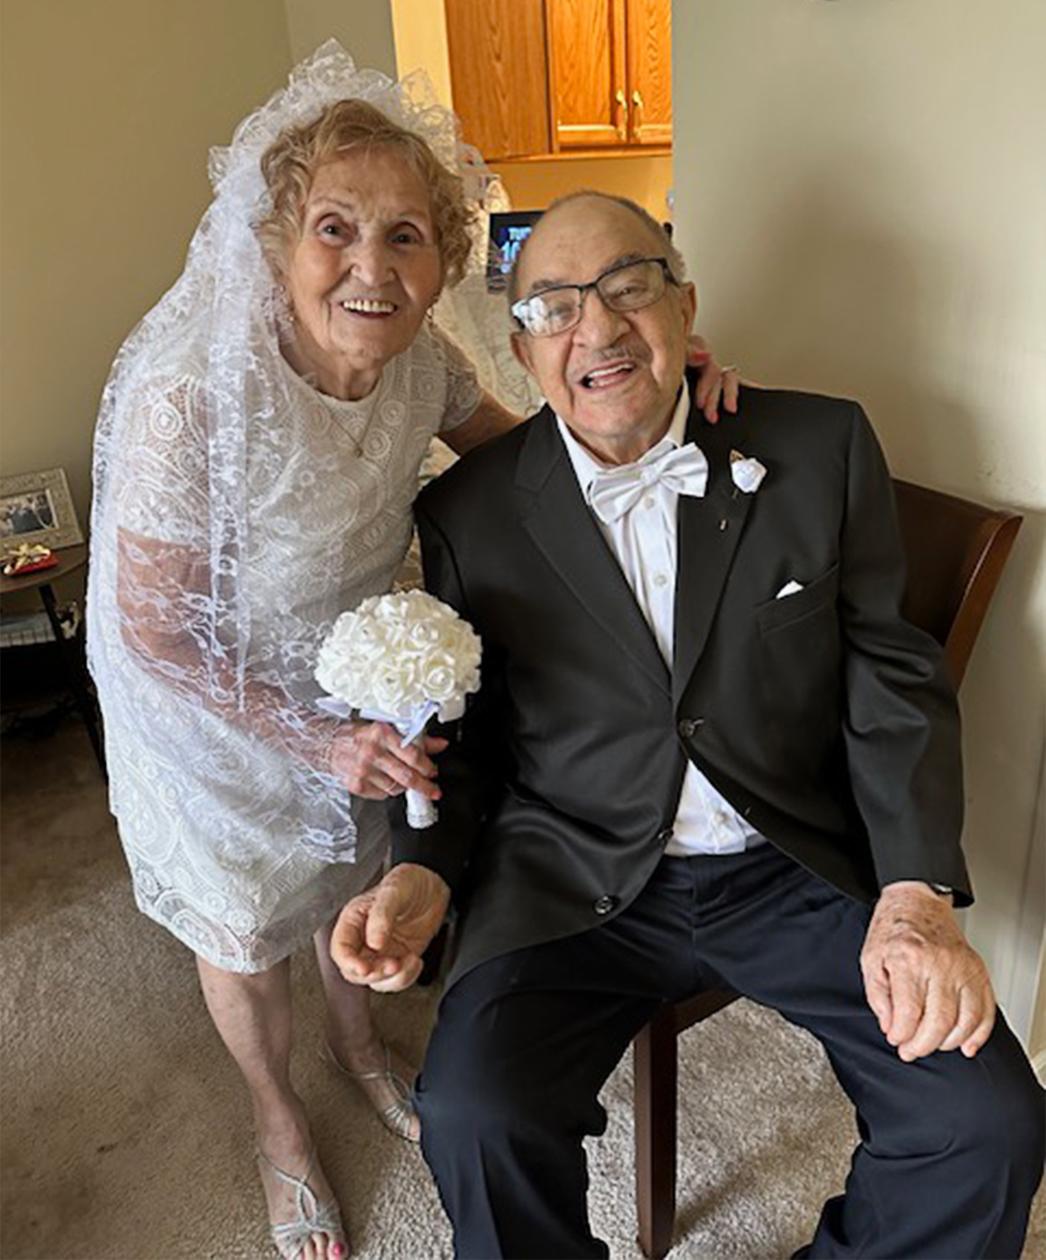 Maria and Norman Leo on their 64th wedding anniversary. (Courtesy of Rose Chodnicki)